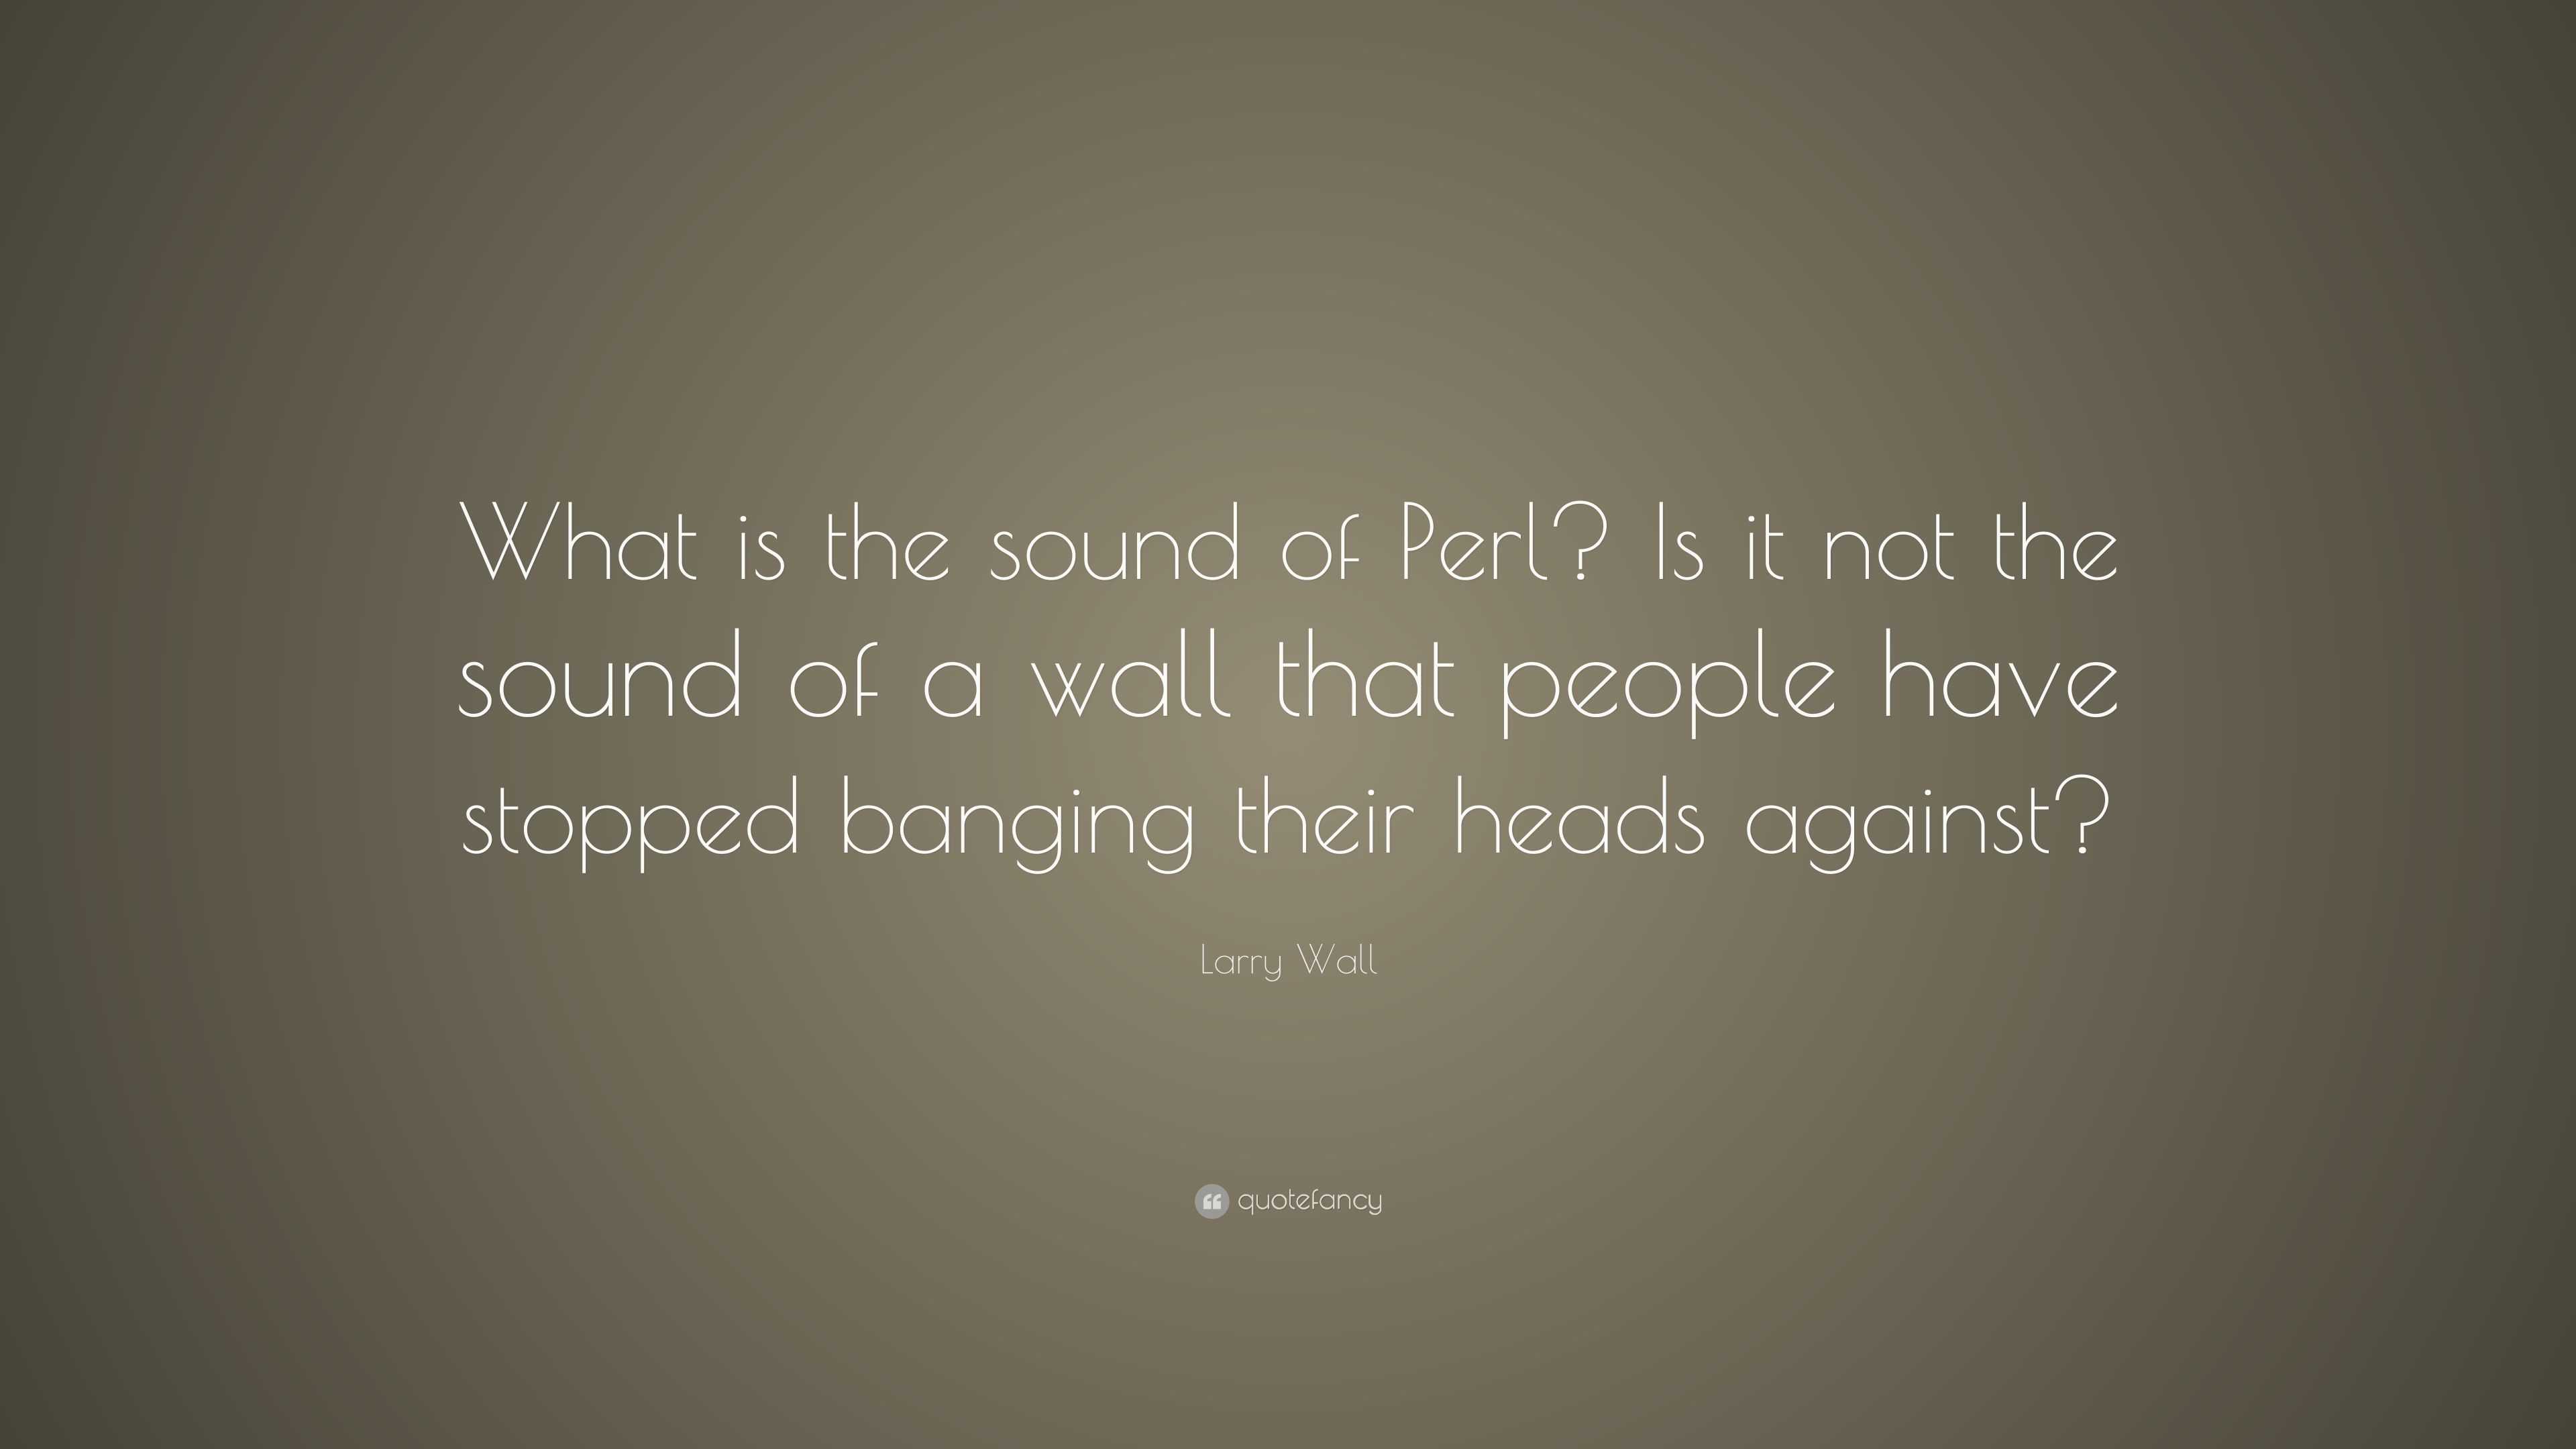 Larry Wall Quote: “What is the sound of Perl? Is it not the sound of a ...